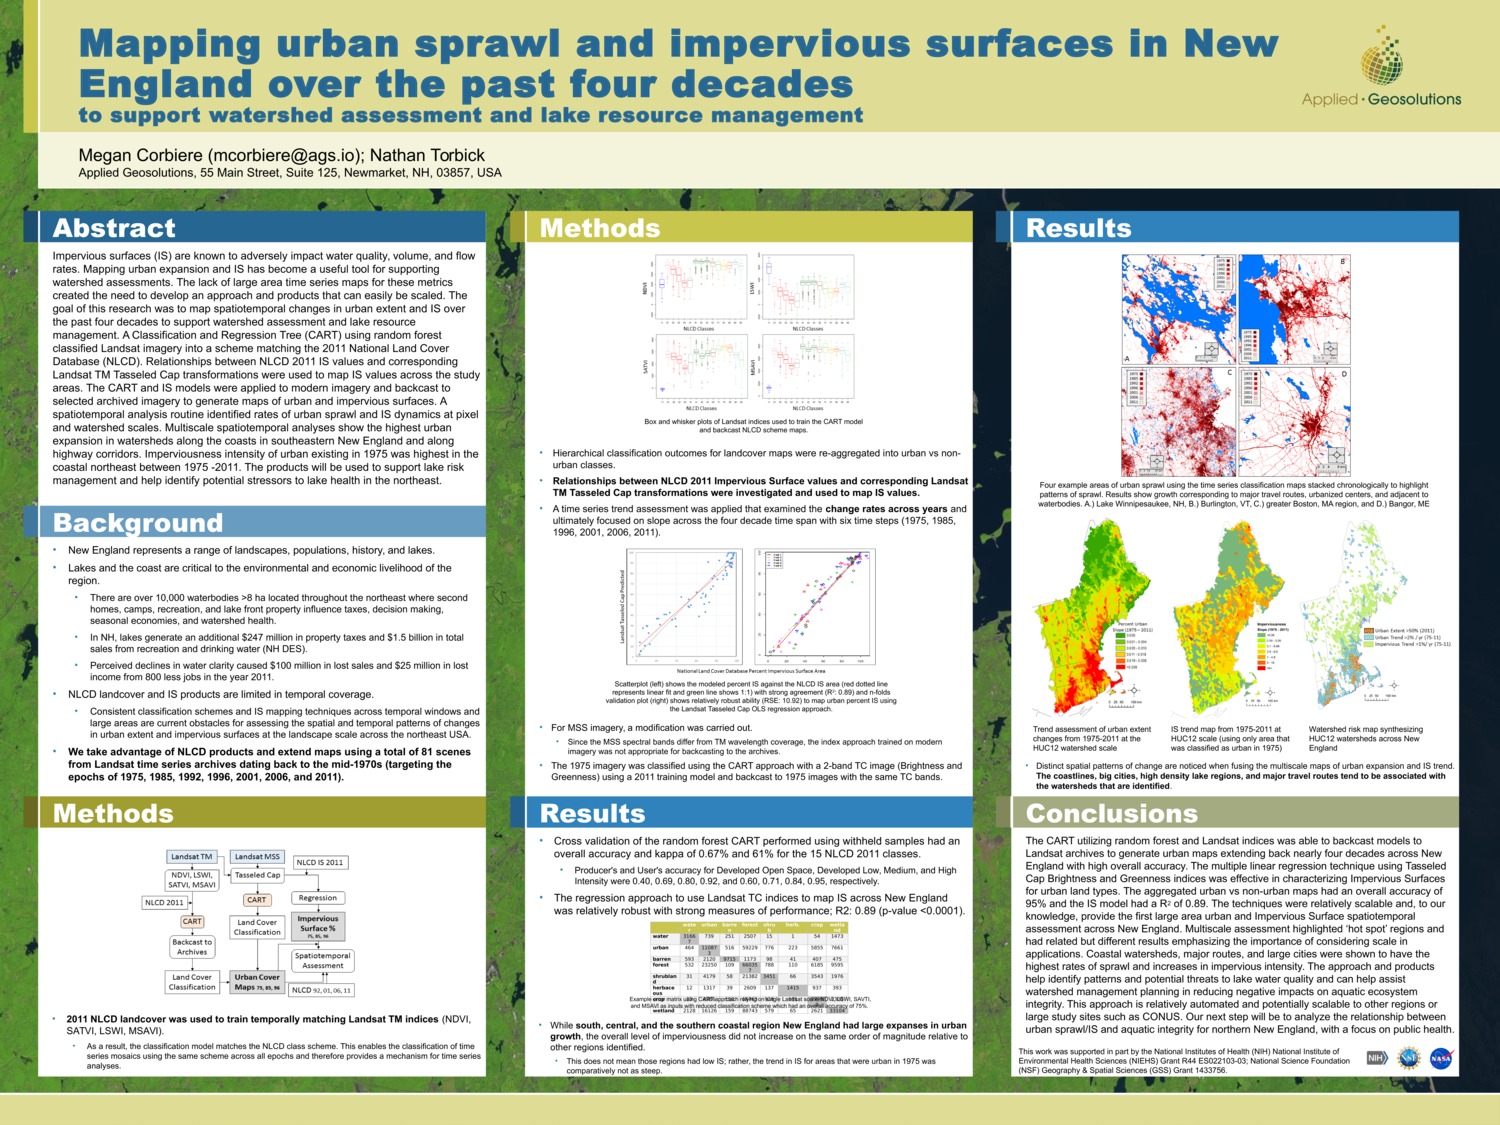 Mapping Urban Sprawl And Impervious Surfaces In New England Over The Past Four Decades by mcorbiere